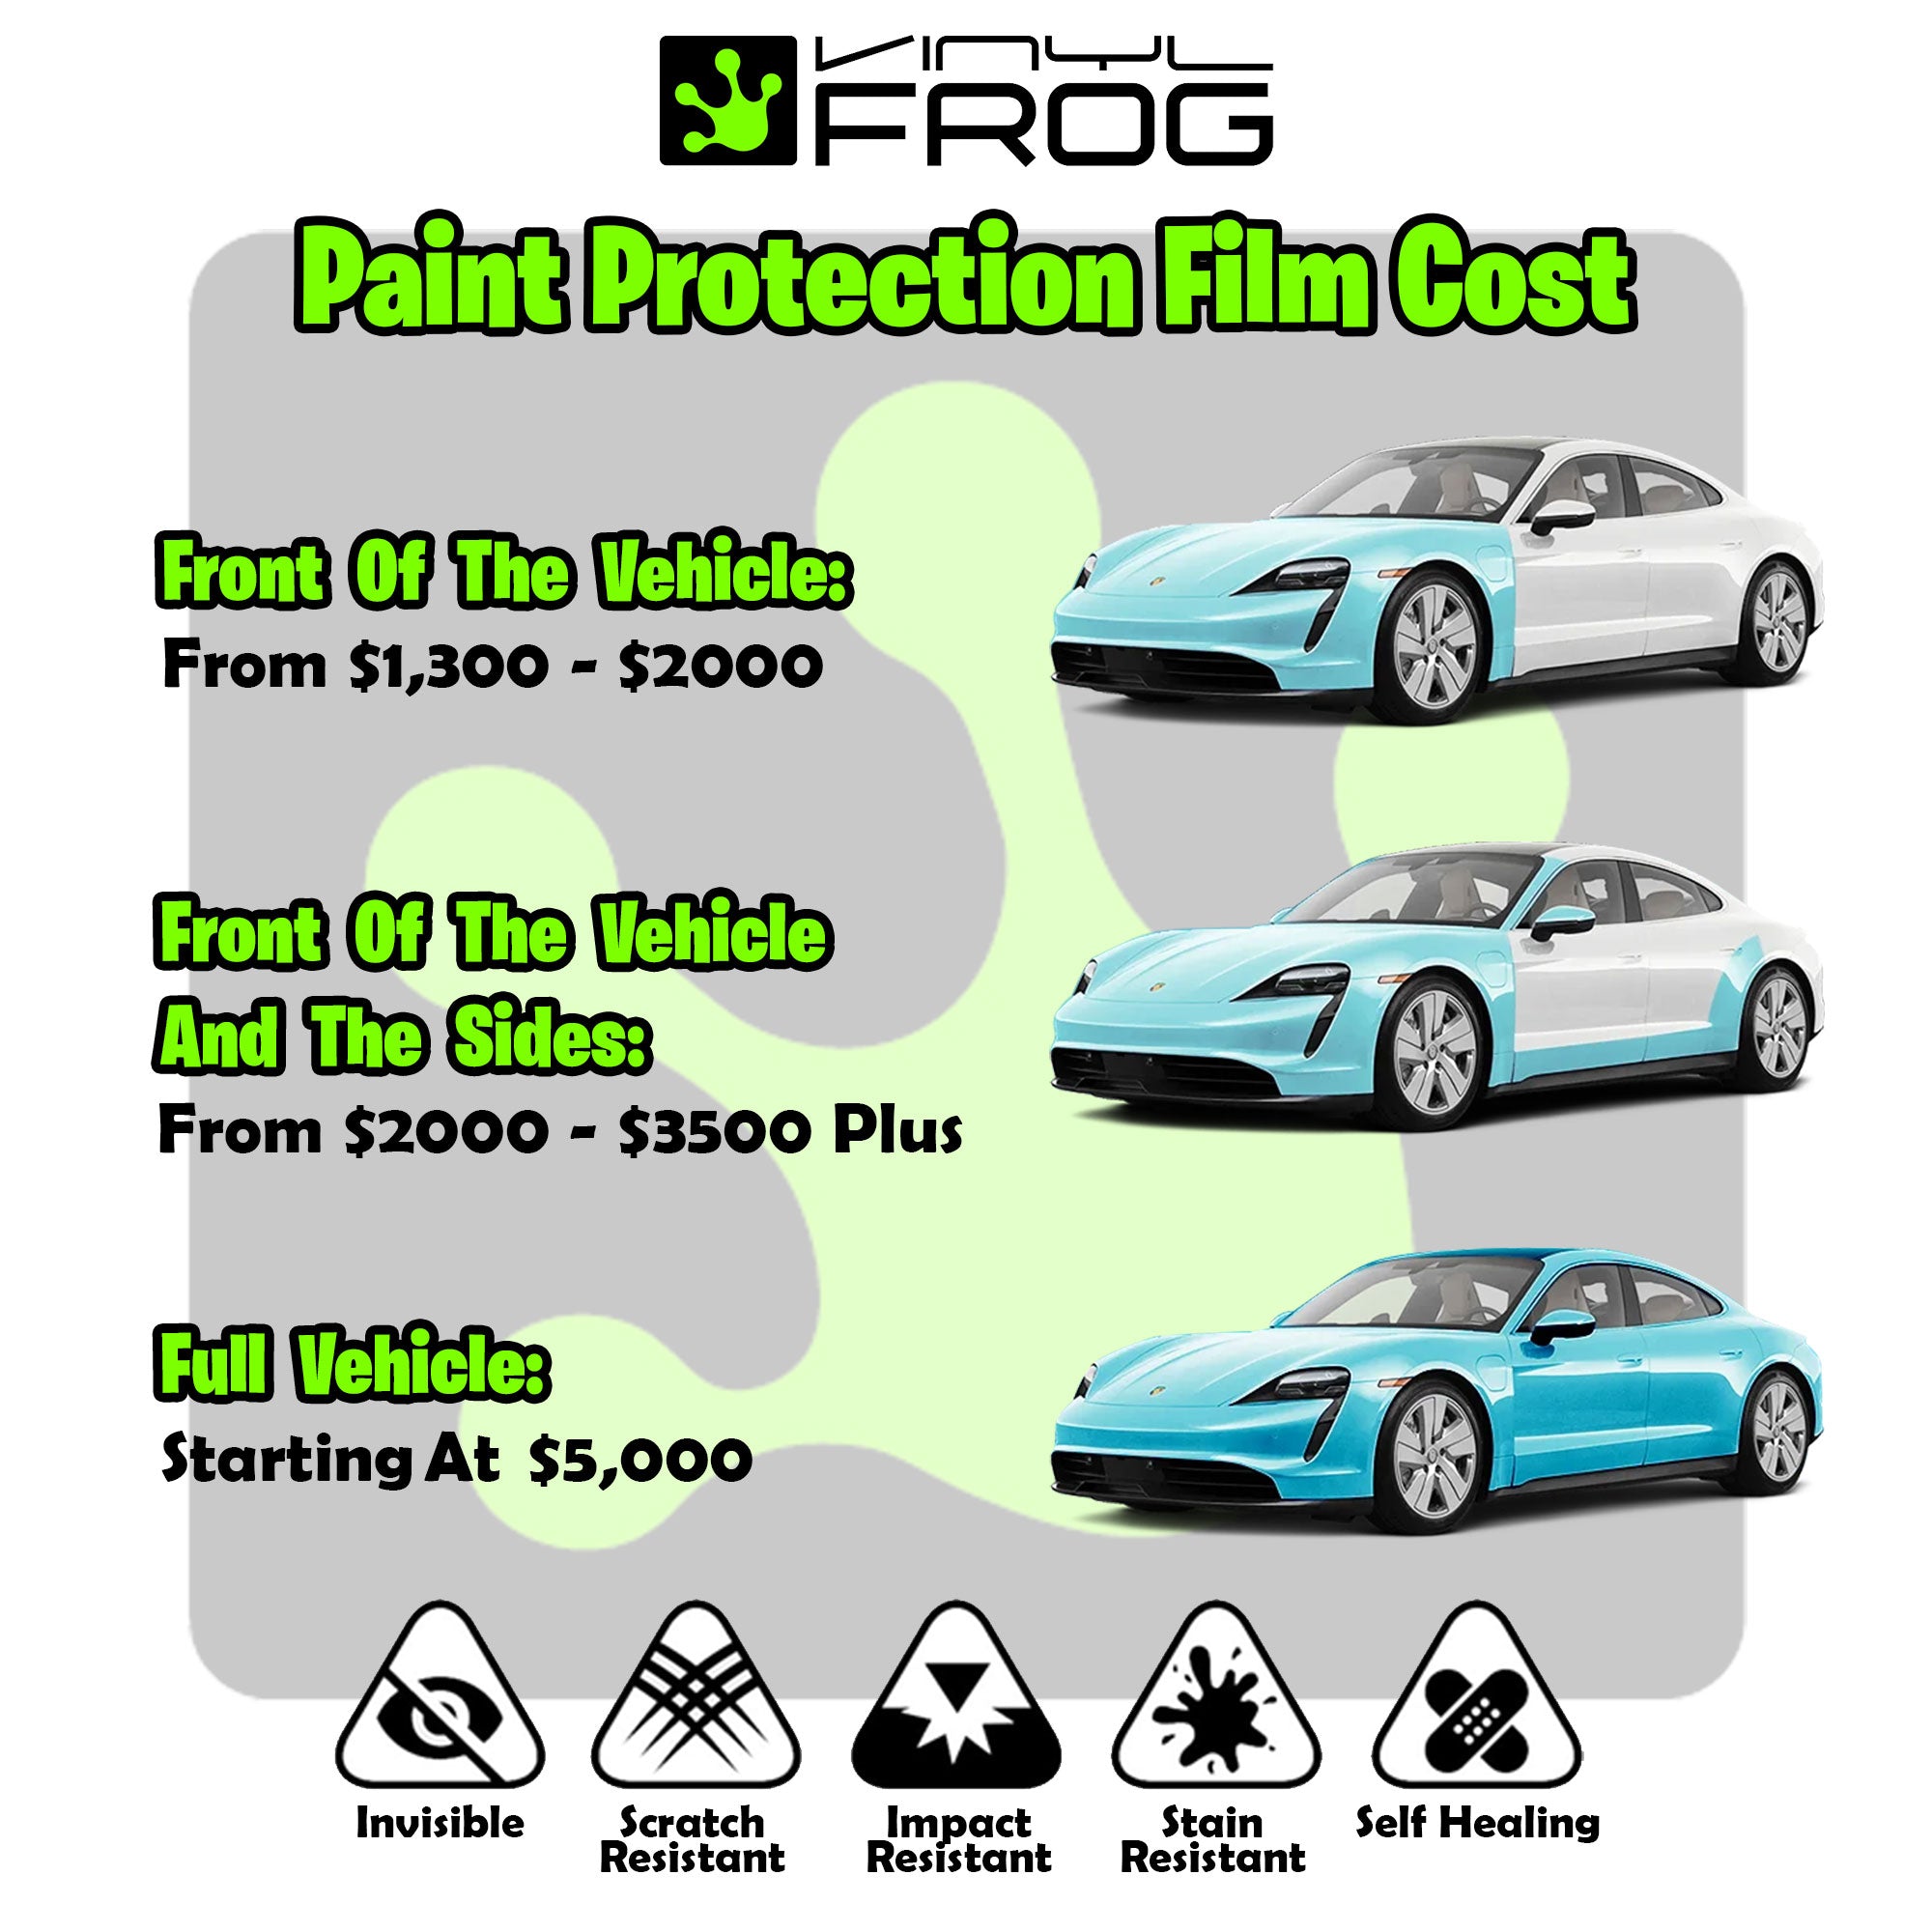 Paint Protection Film Cost